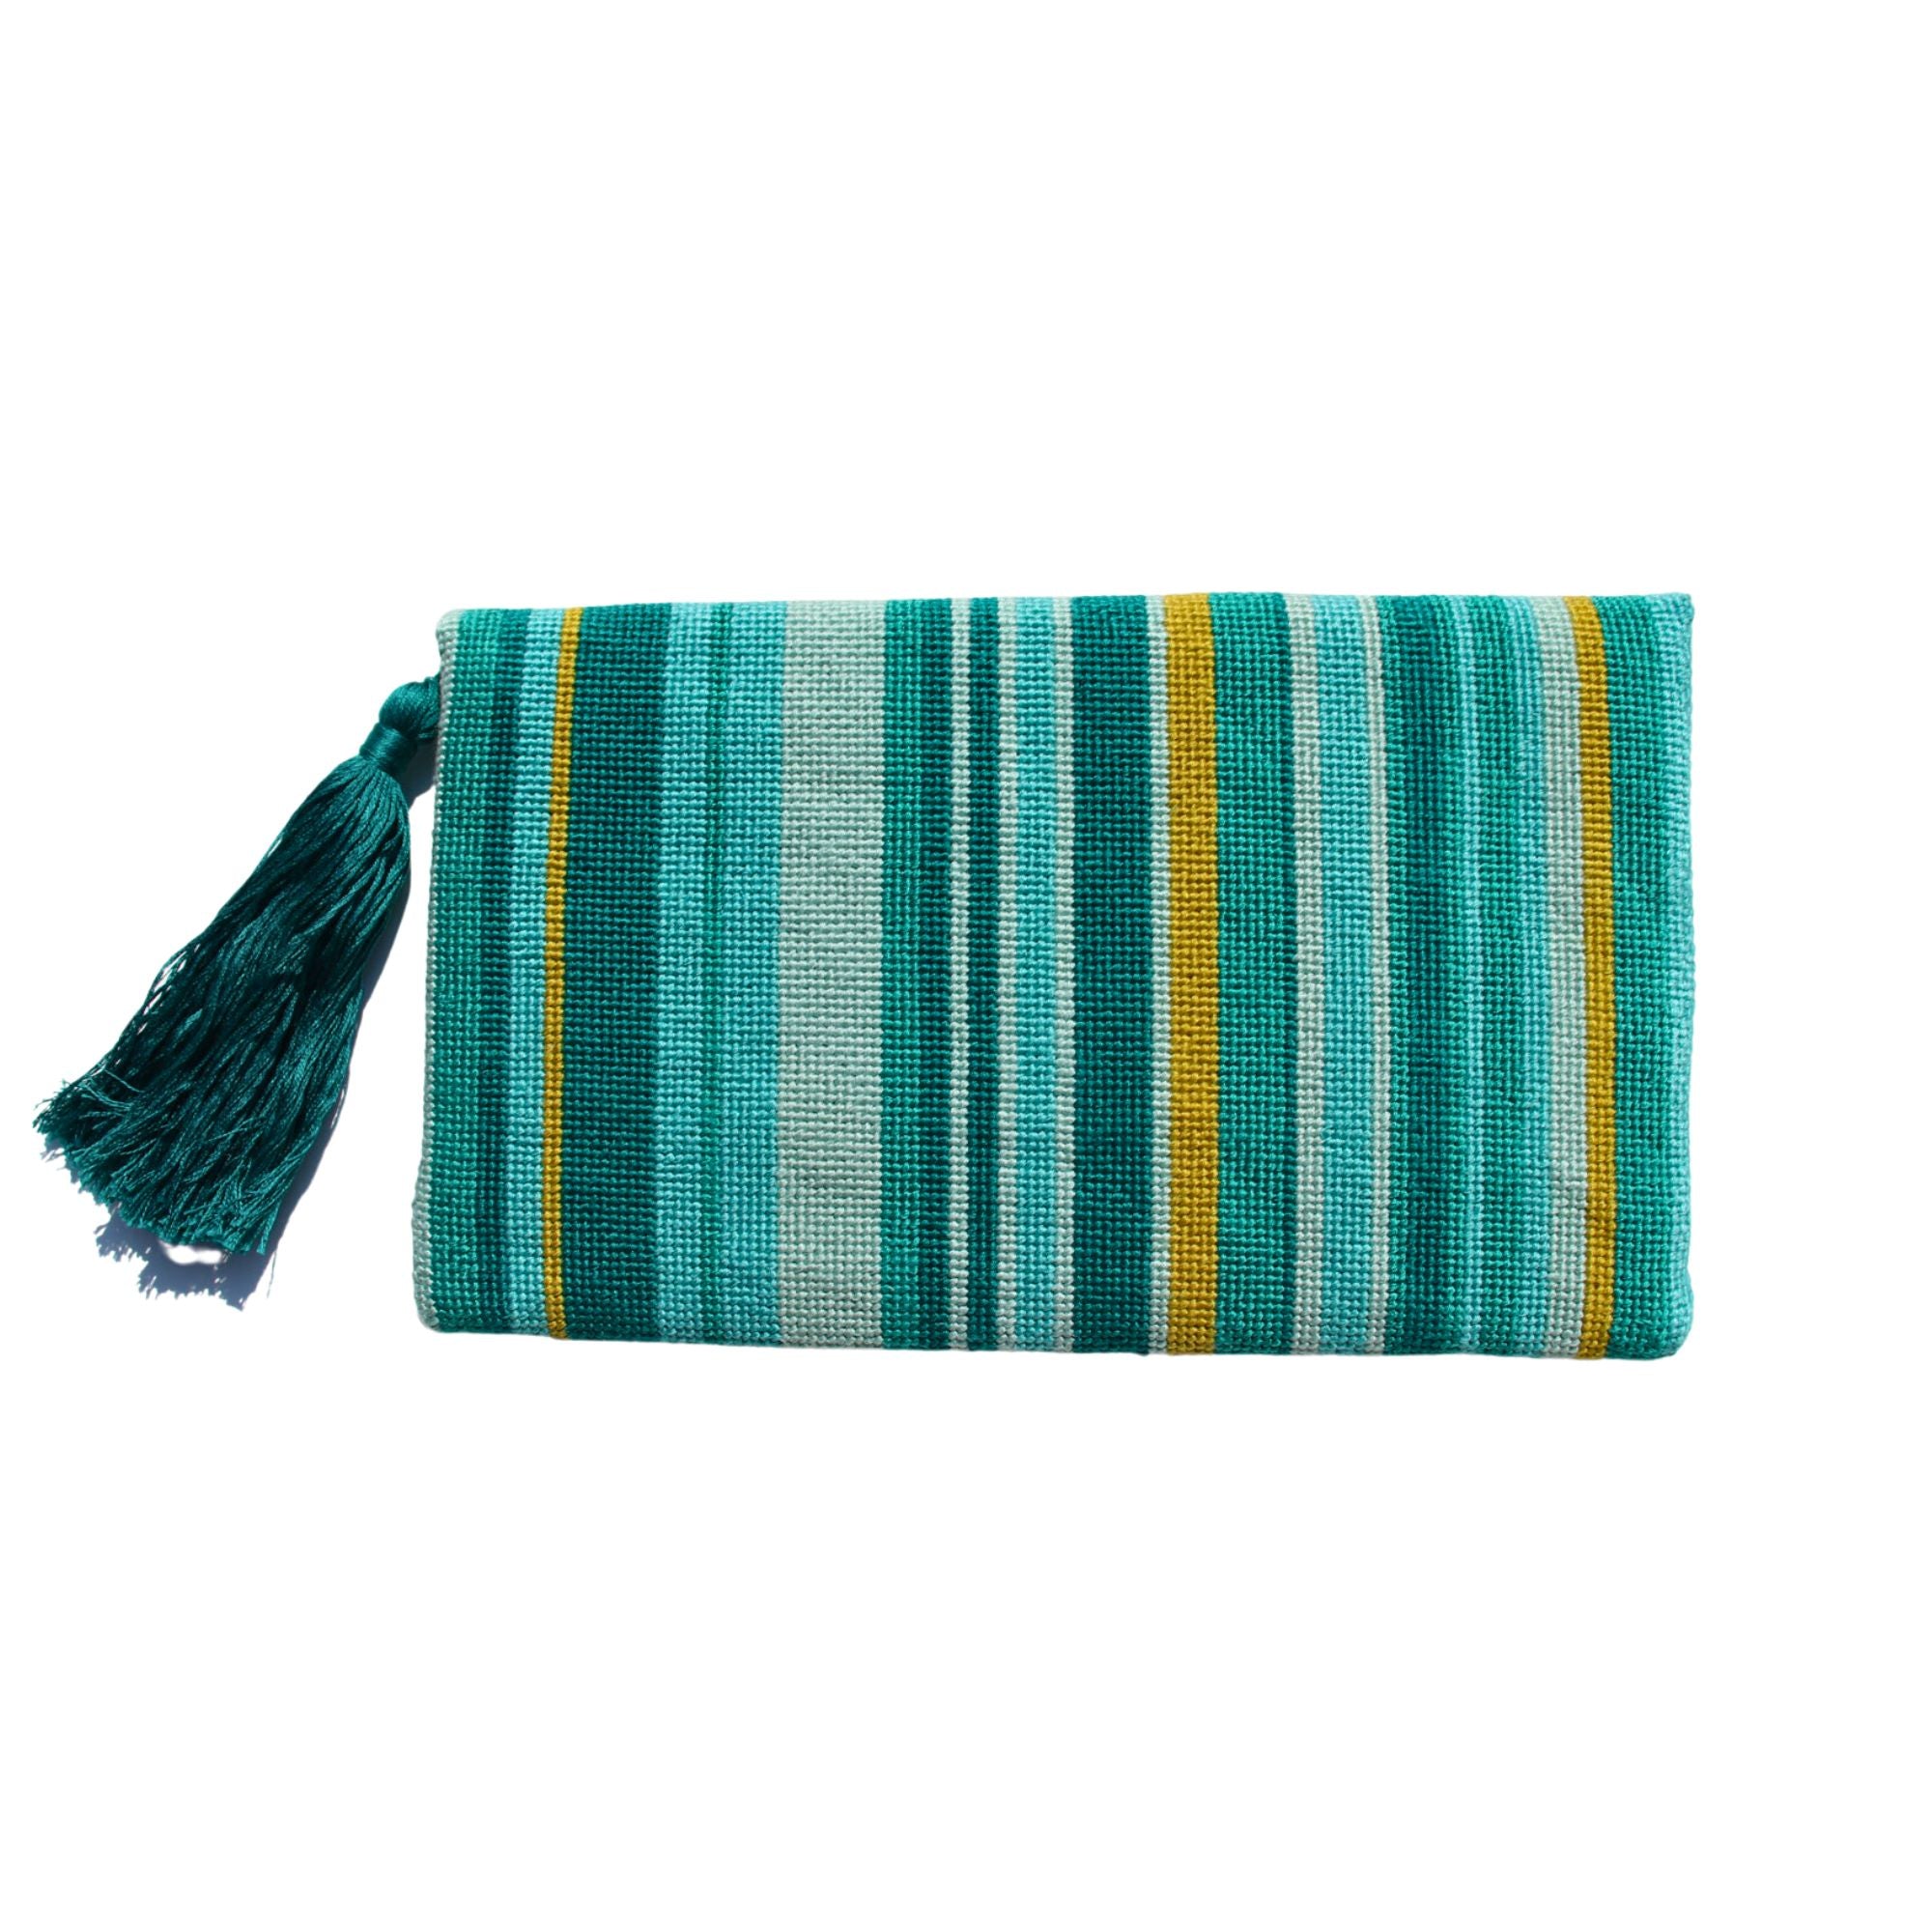 Turquoise Striped Clutch Bag